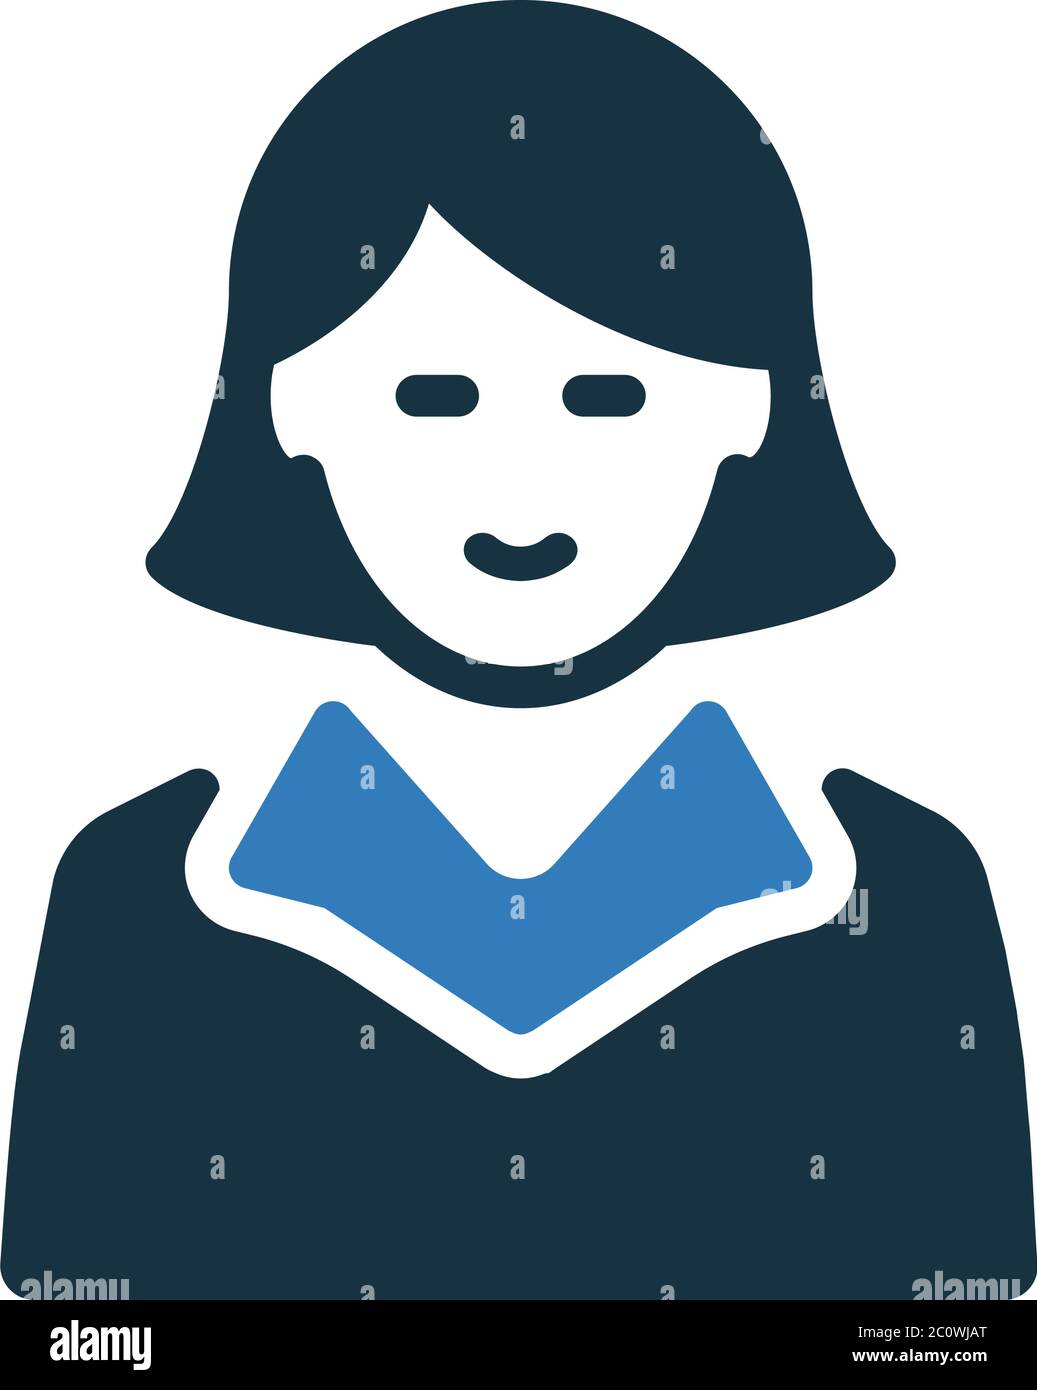 Vector Avatar Icon Profil Picture Stock Vector - Illustration of flat,  girl: 126287784